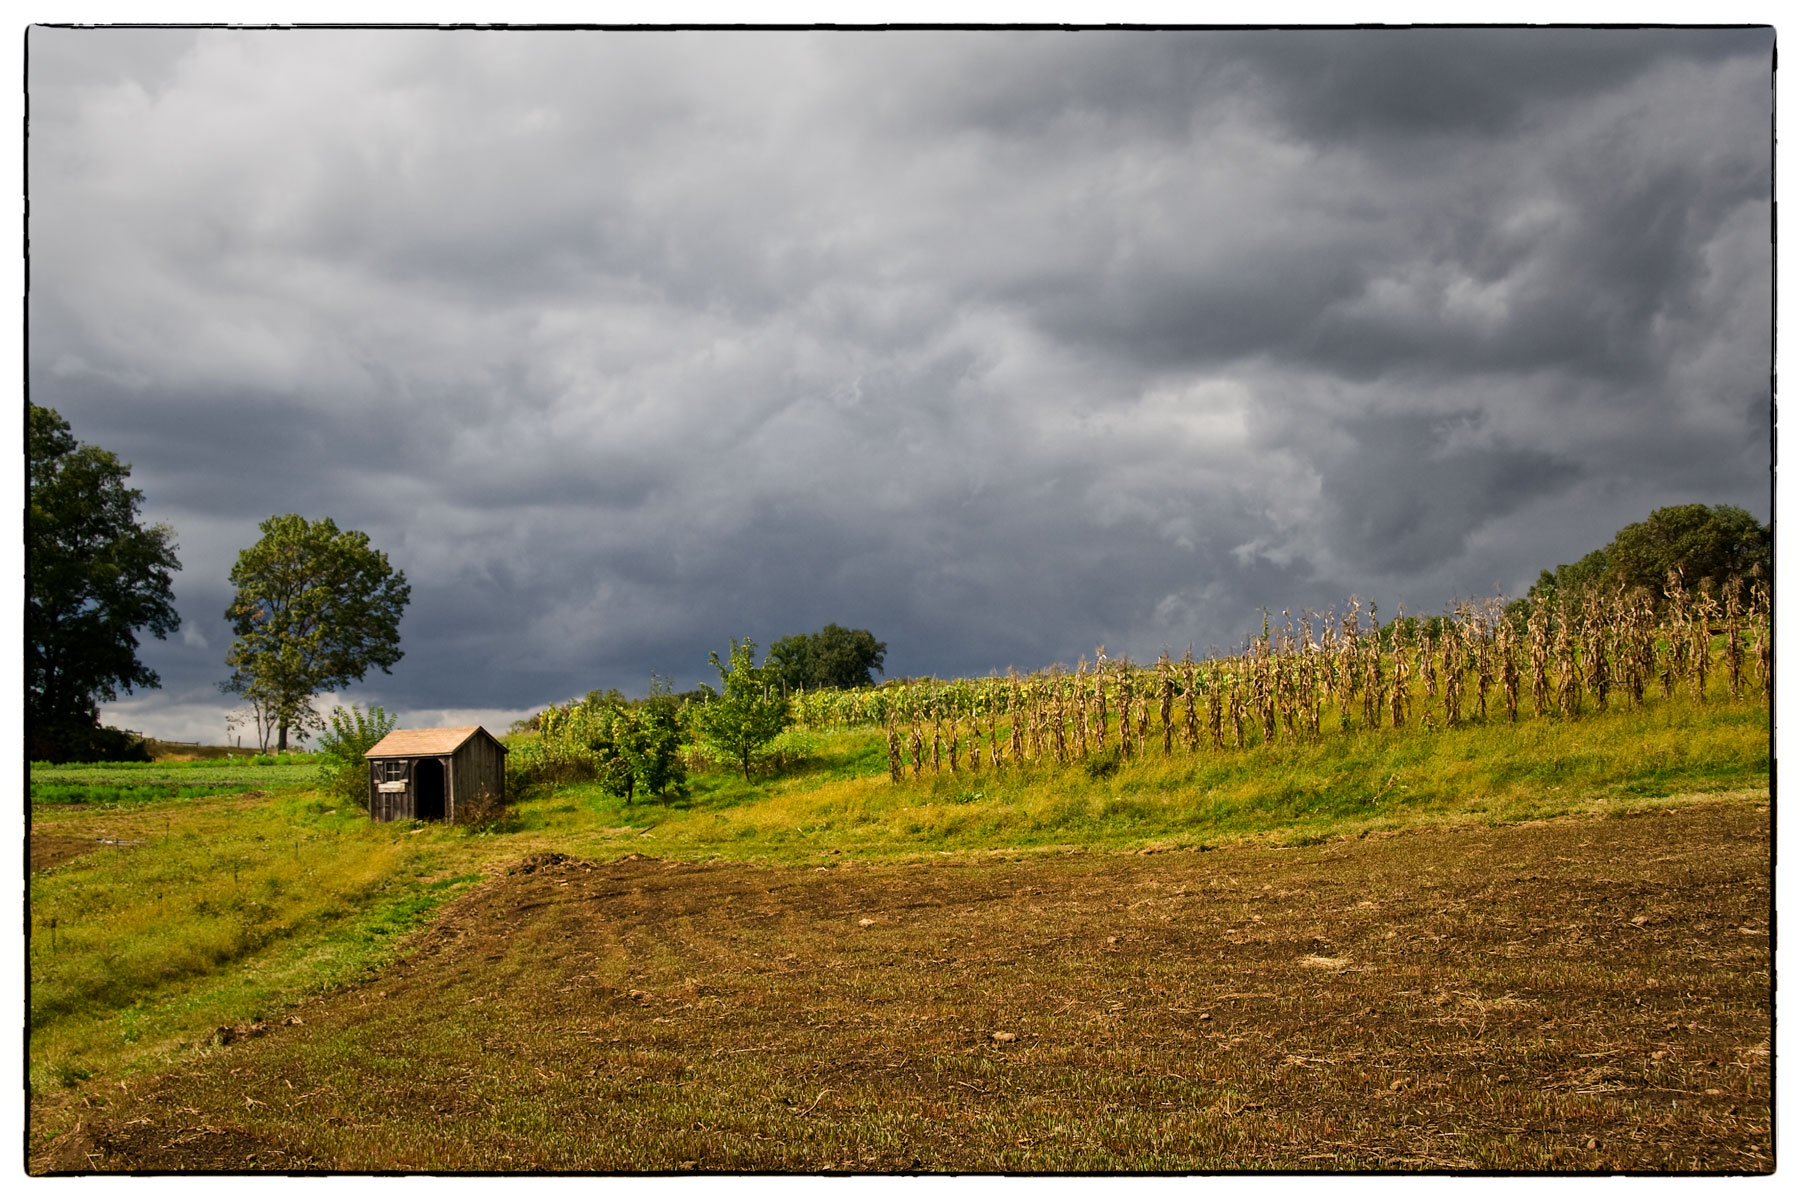 Approaching Storm at Stone Barns